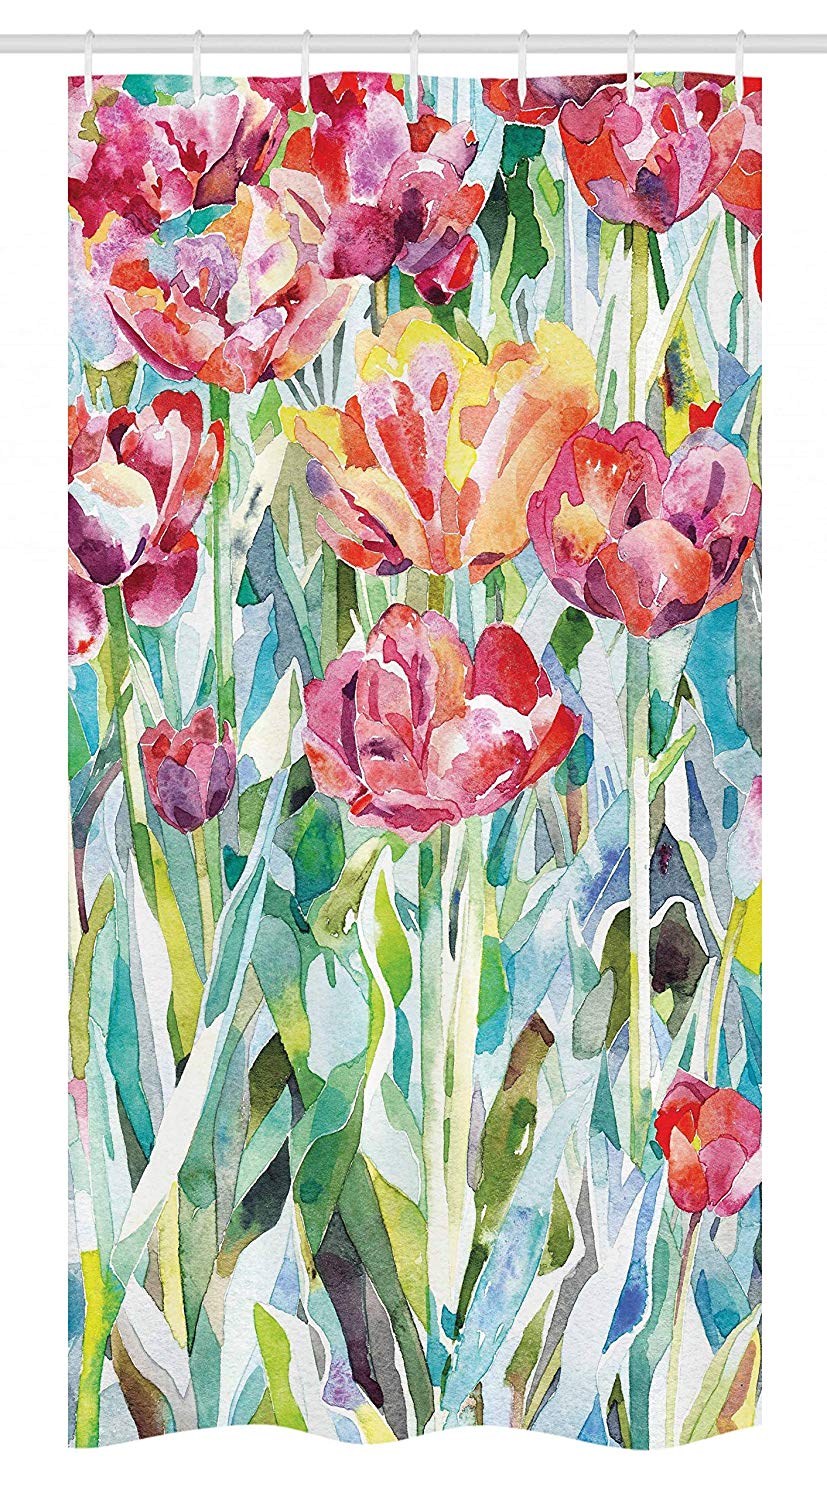 Ambesonne Watercolor Flower Stall Shower Curtain, Painting of Summer Spring Flowers in Faded Colors Floral Seasonal Print, Fabric Bathroom Decor Set with Hooks, 36